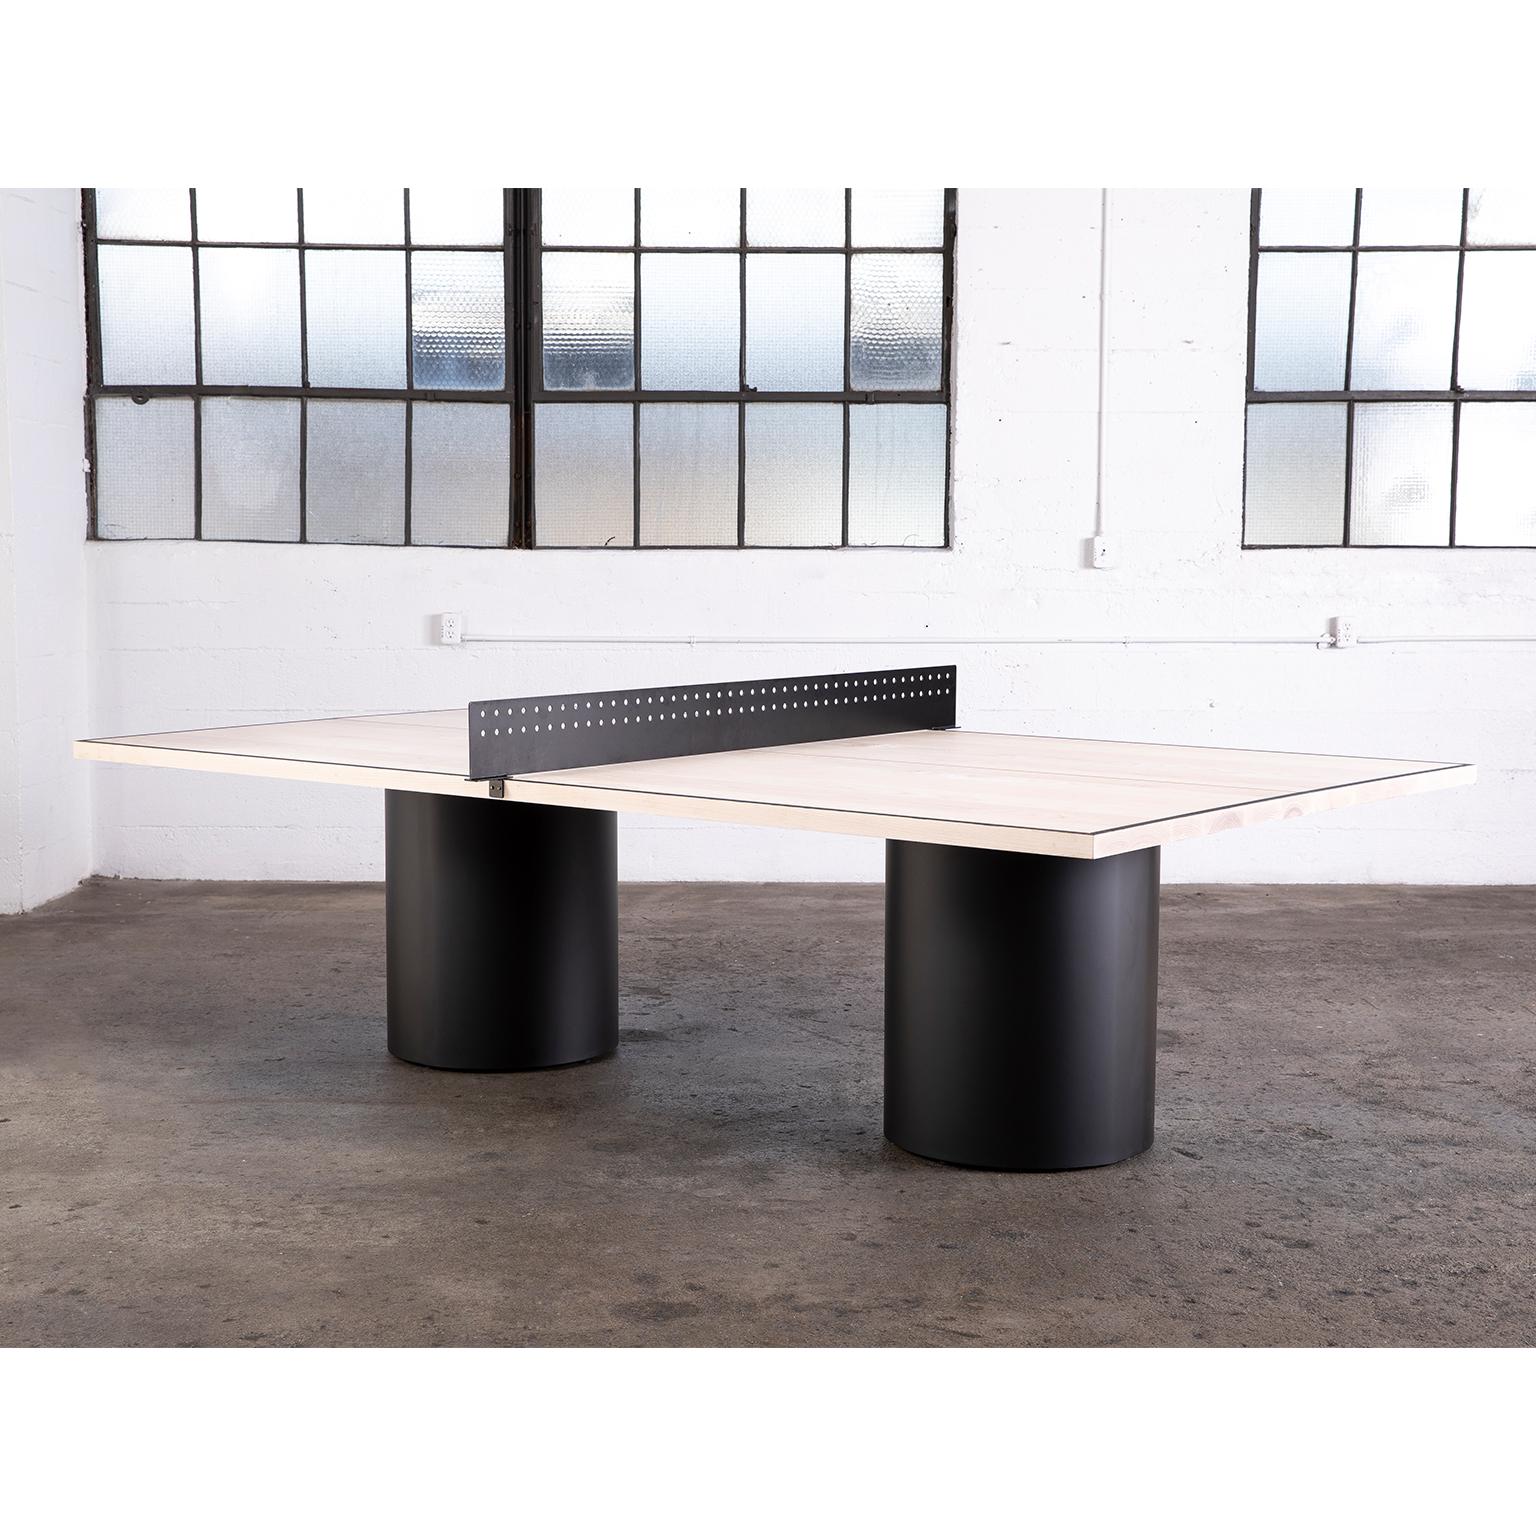 The Column Ping Pong Table is our modern take on a classic game. The table’s matte wood top is supported on two metal columns that can be powder coated in matte black, white or painted to your specifications. The tabletop is divided by a